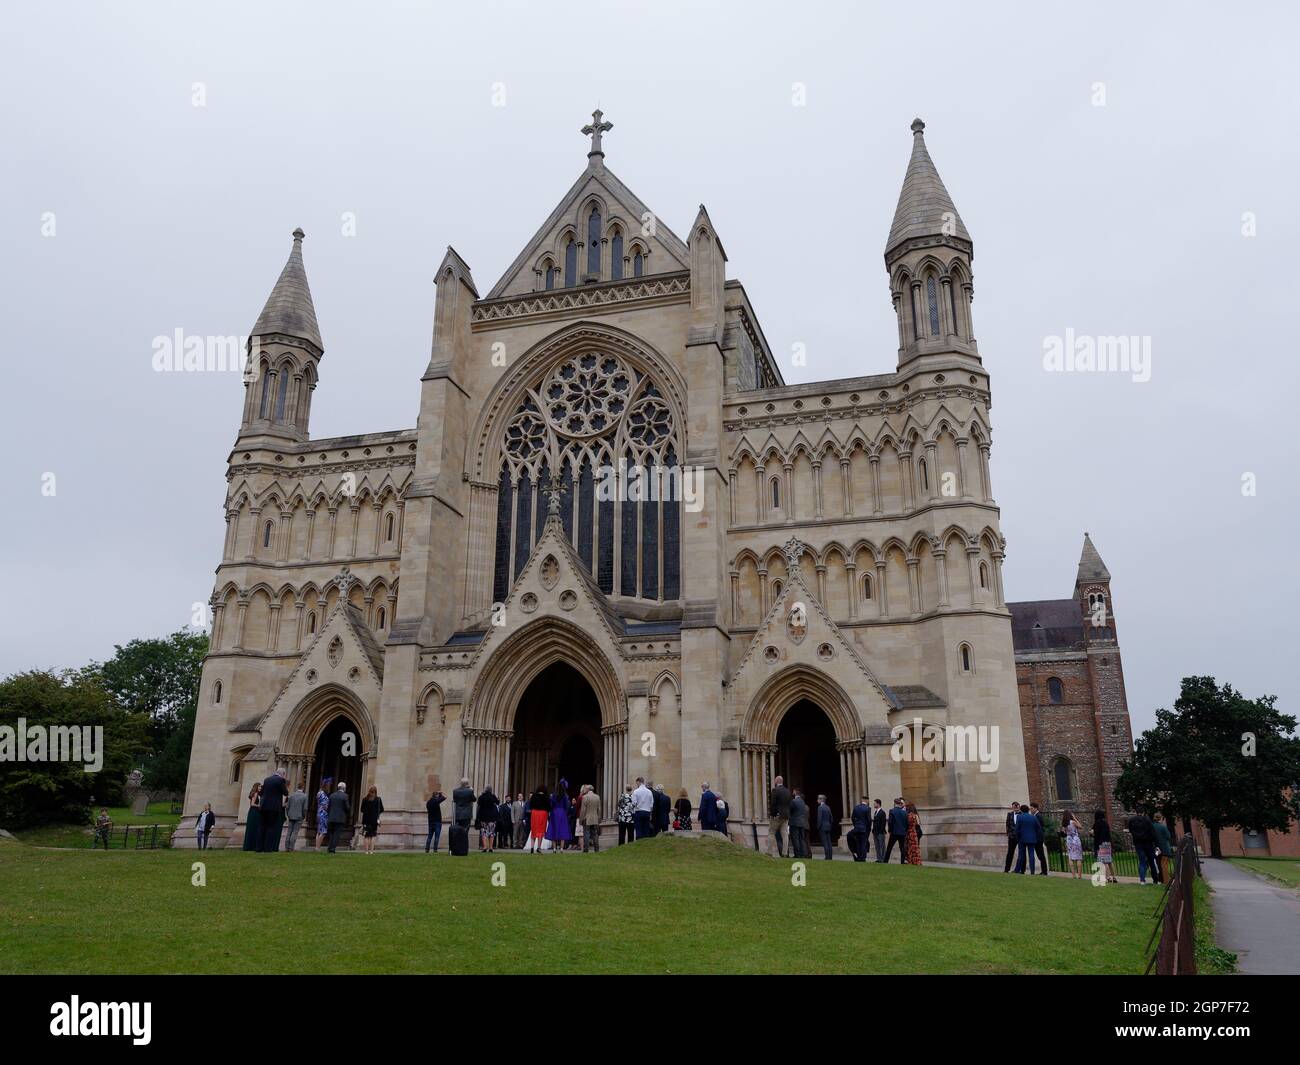 St Albans, Hertfordshire, England, September 21 2021: Wedding guests wait to go inside the Cathedral. Stock Photo